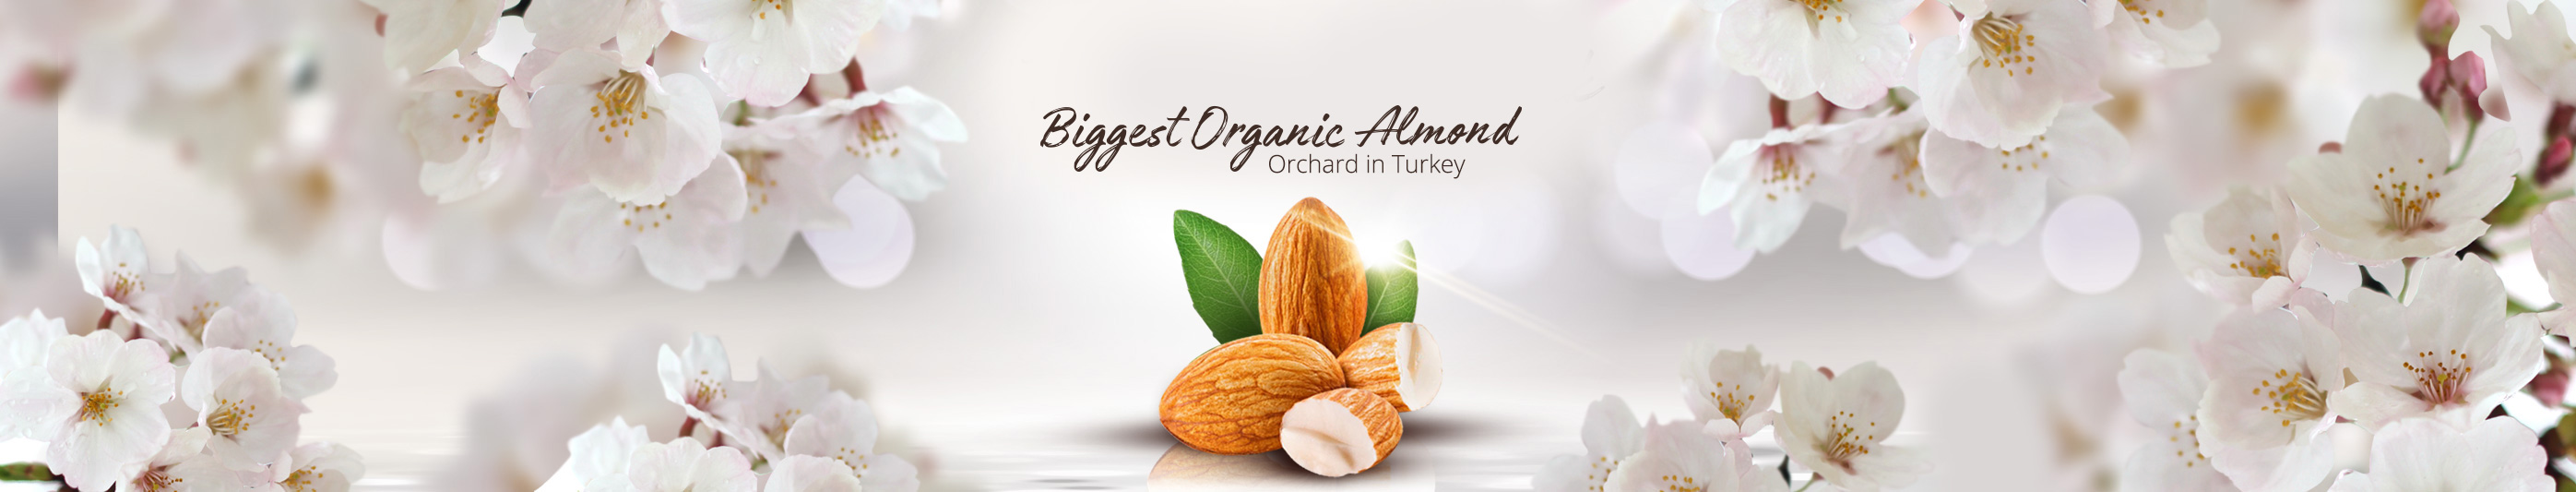 The Biggest Organic Almond Orchard In Turkey